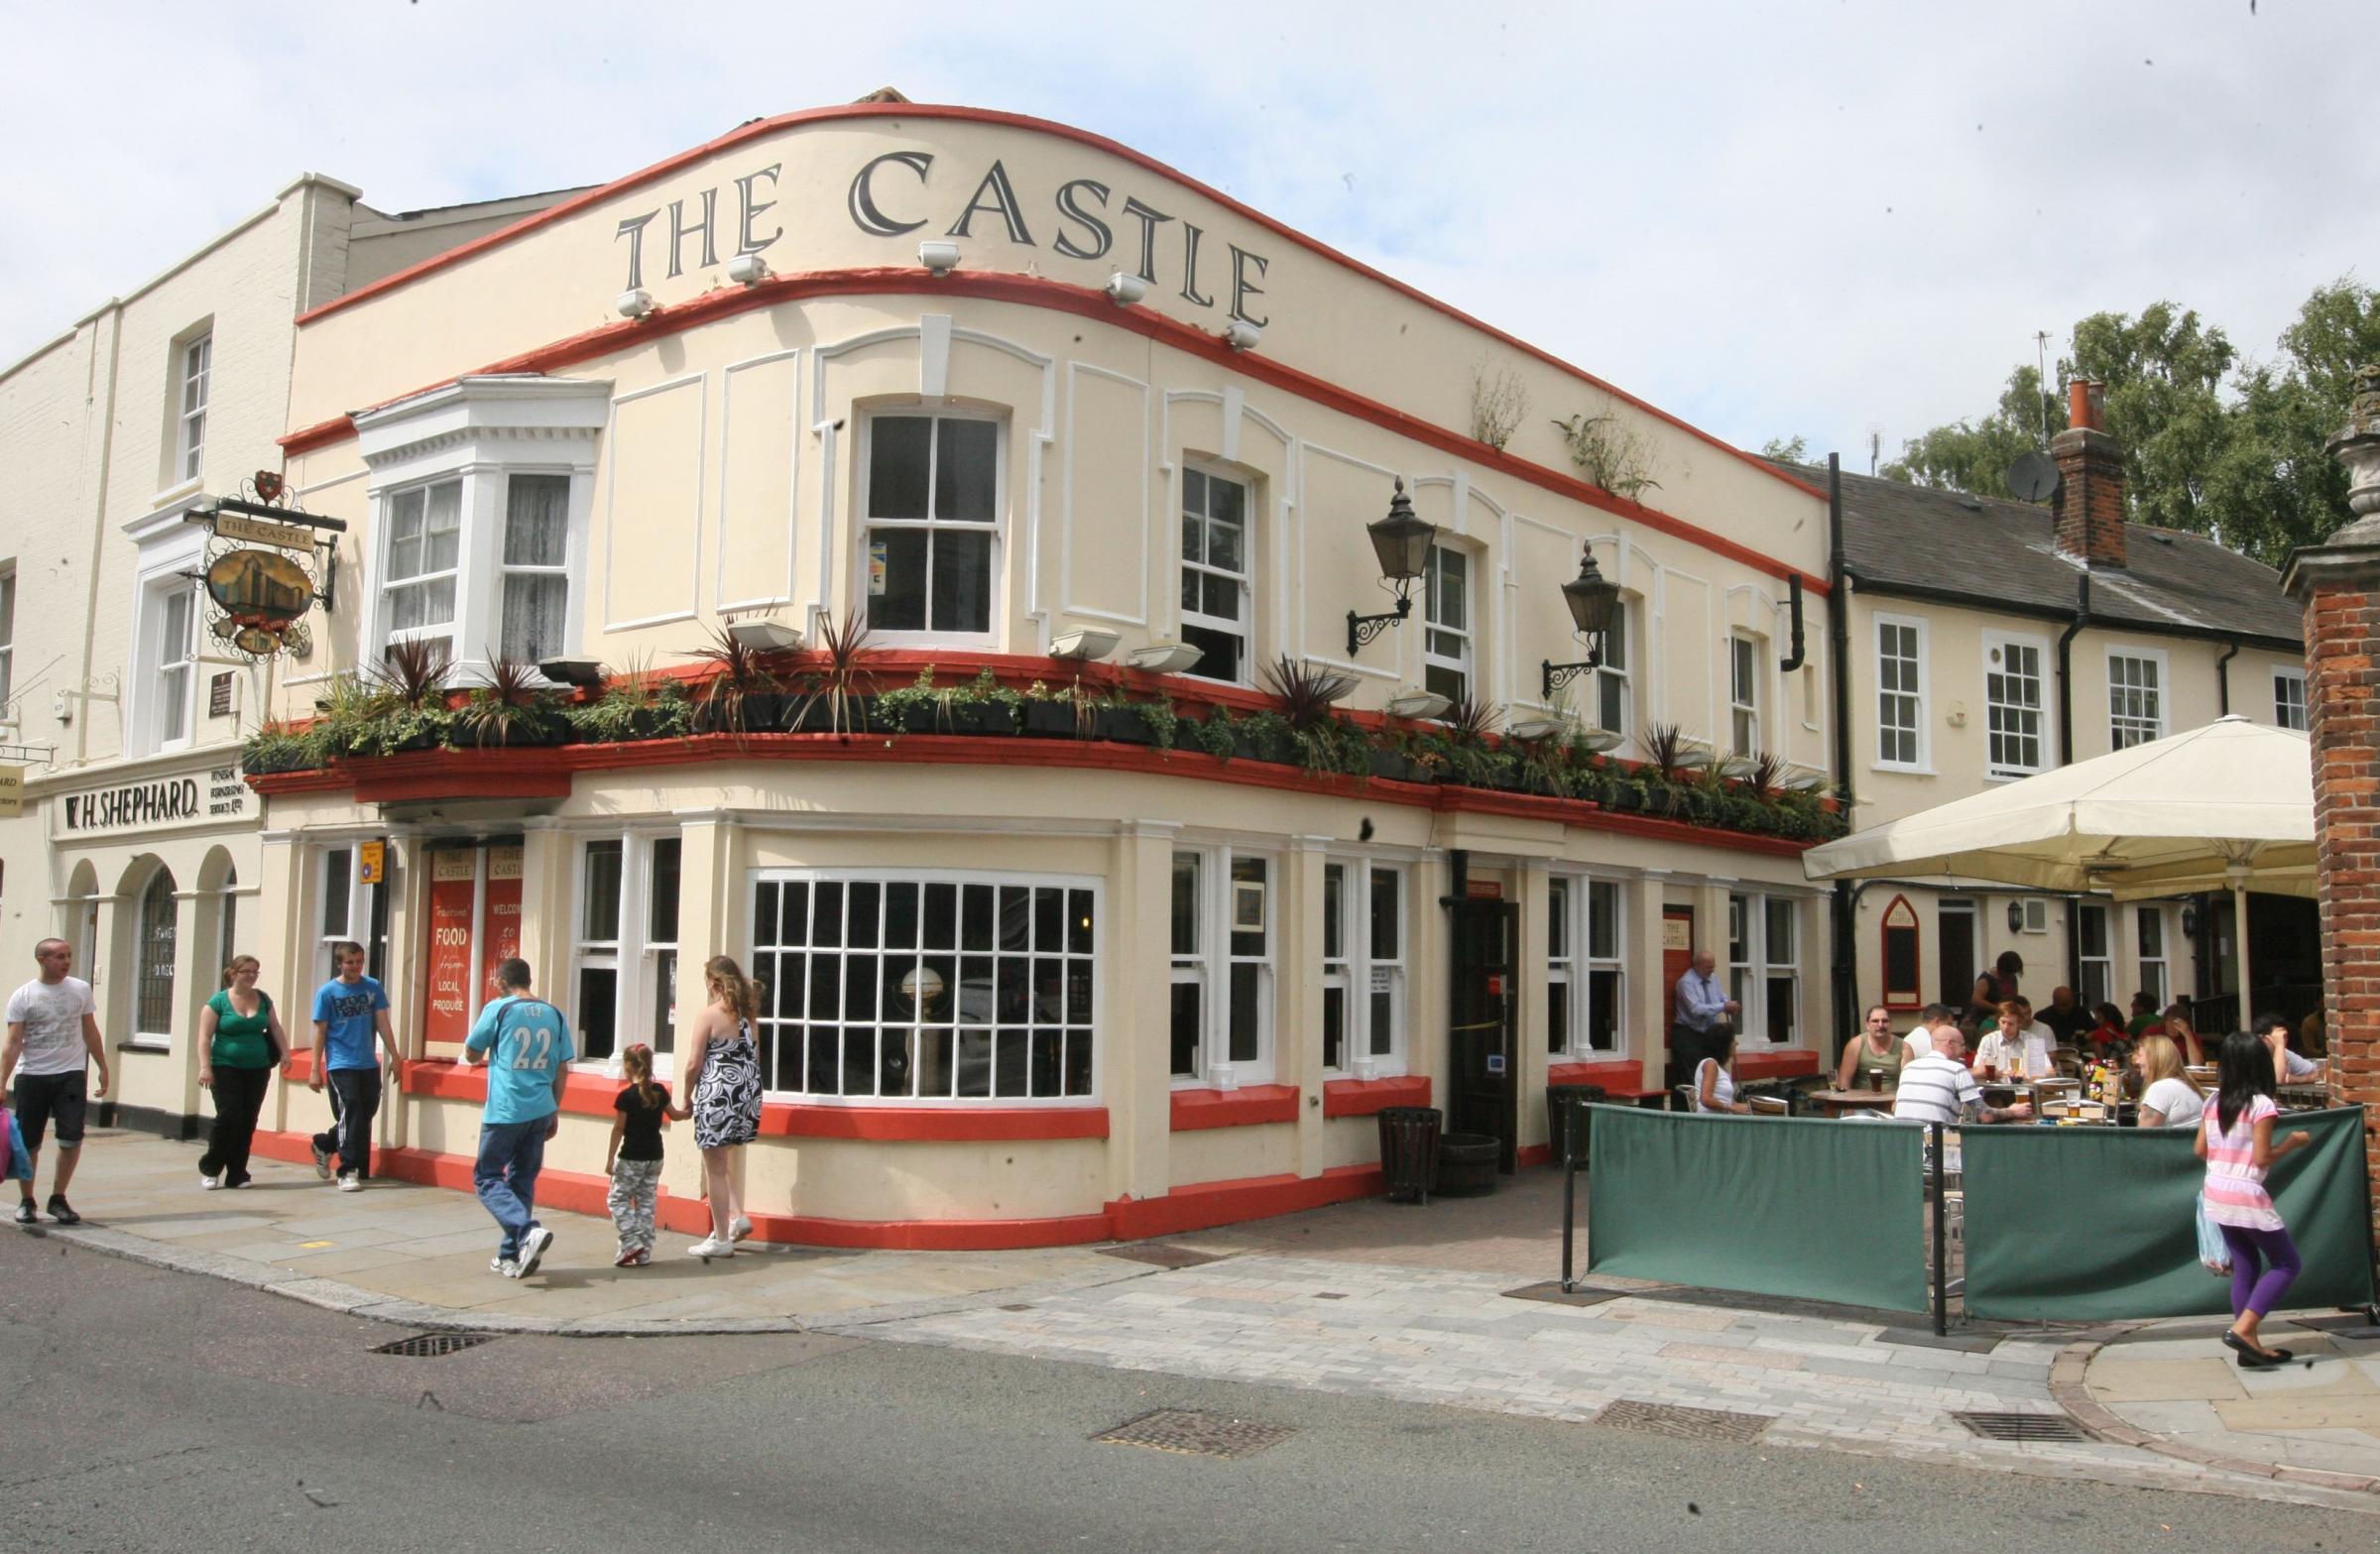 Popular town centre pub goes on the market with a £99,500 price tag